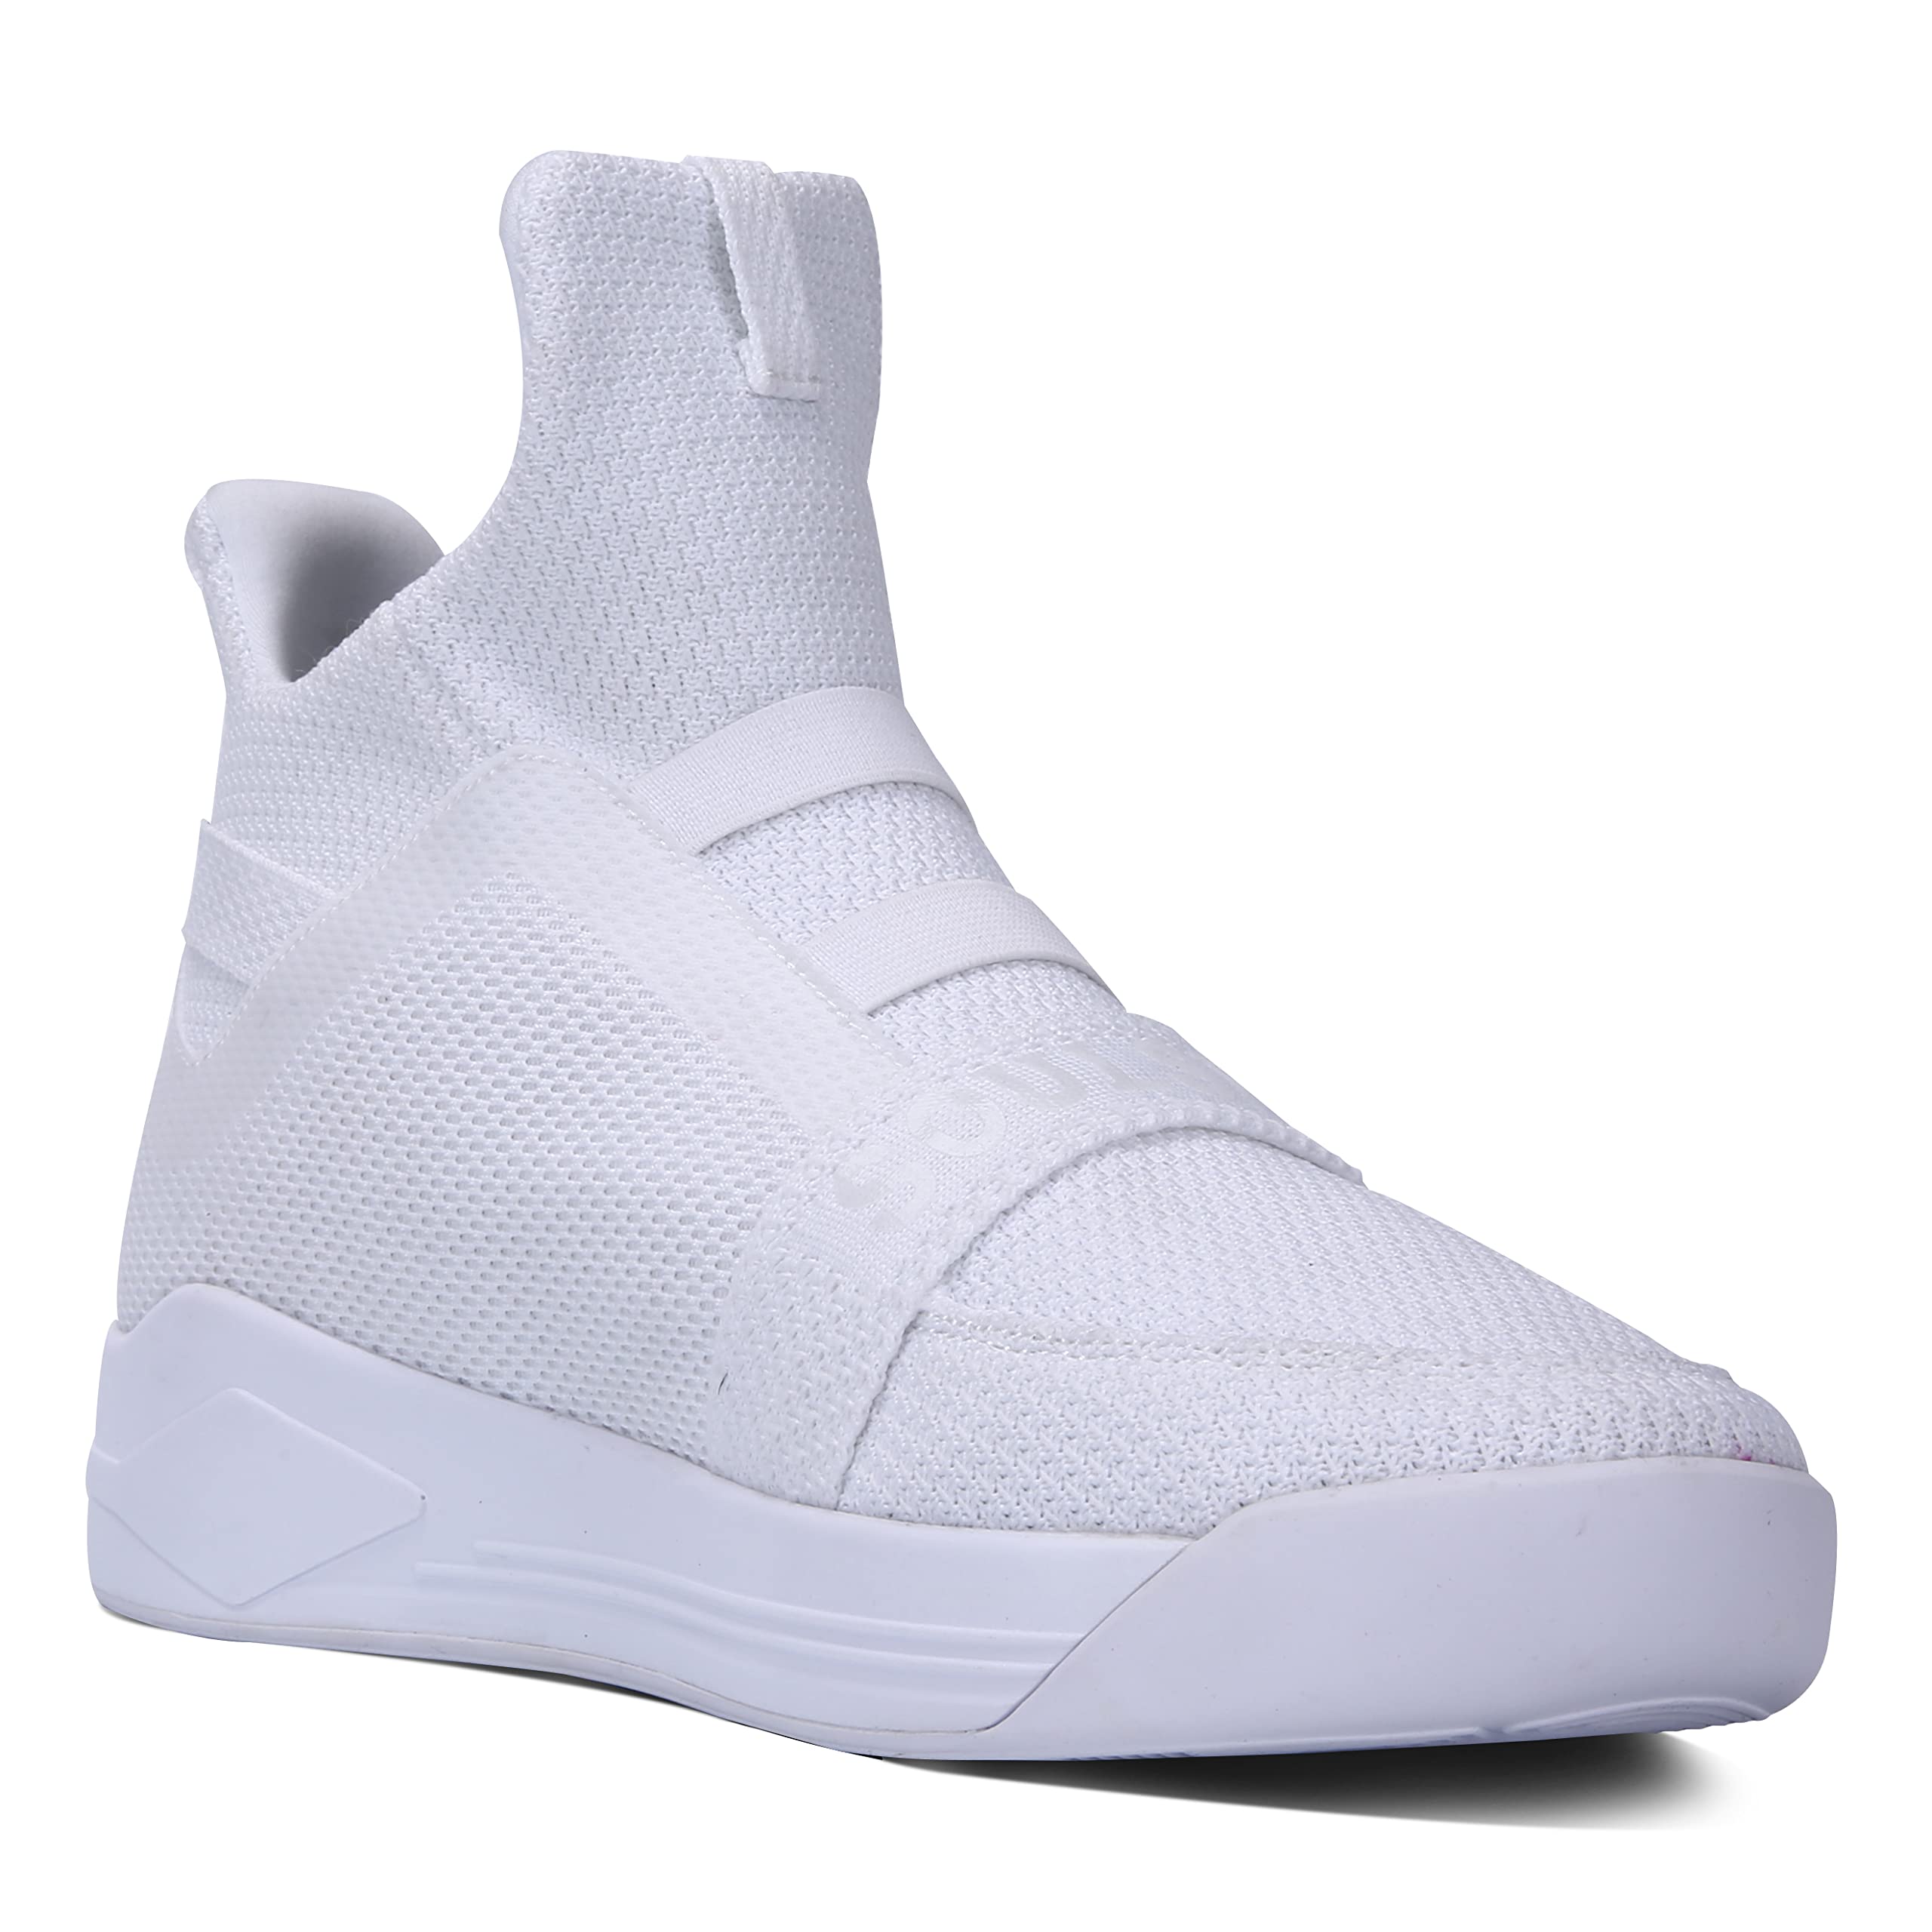 Soulsfeng Mens Casual High Top Sneakers Breathable Mesh Knit Ankle Boots Athletic Shoes(Men 11 US=EUR45) White